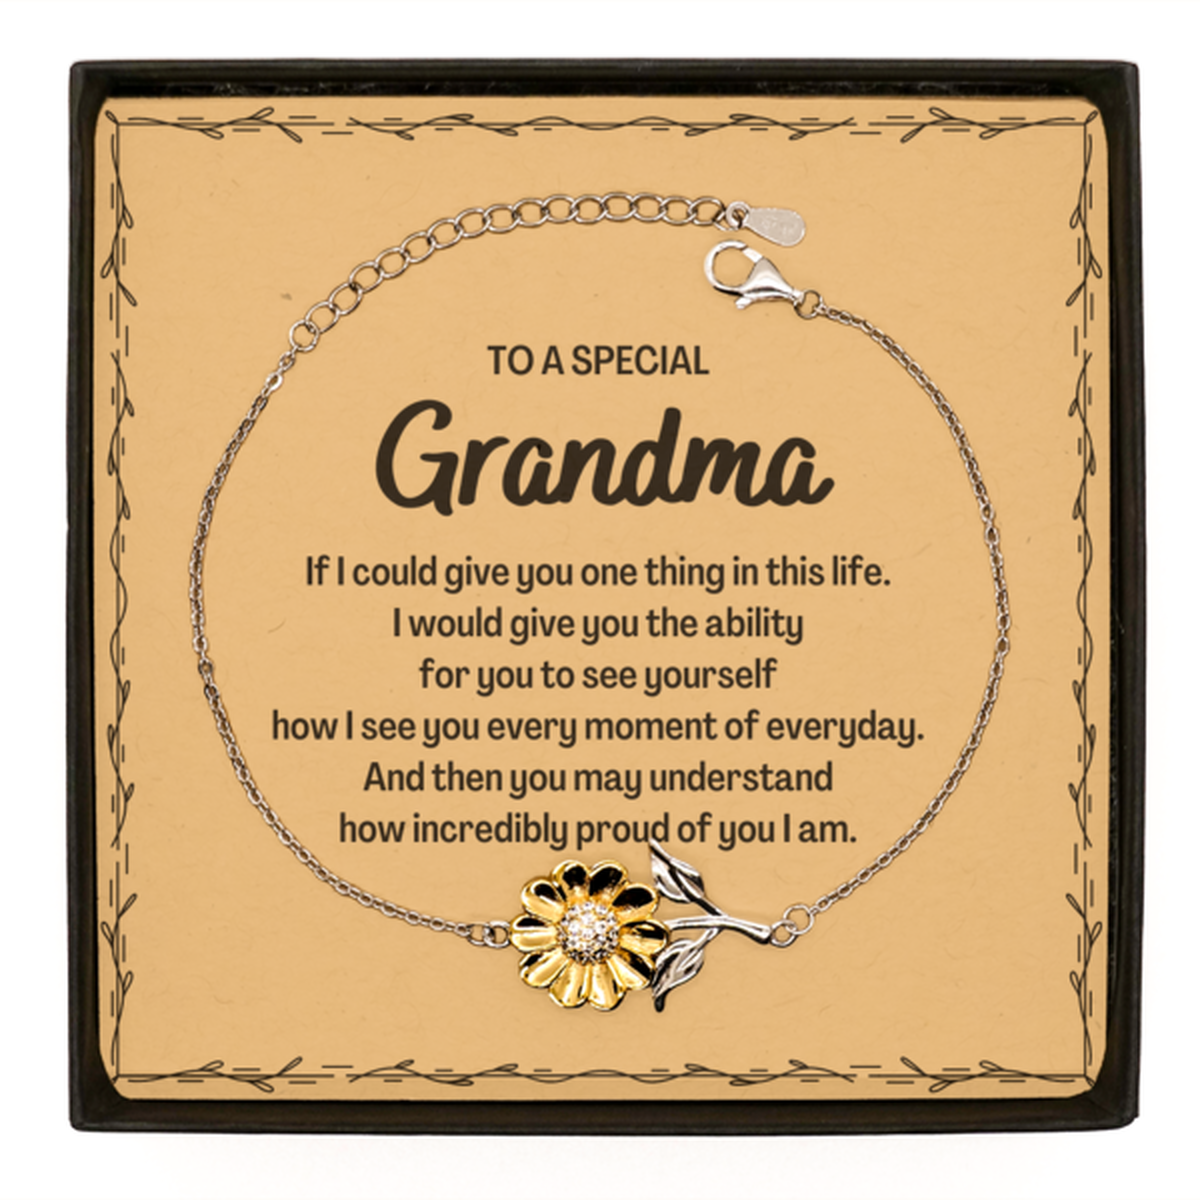 To My Grandma Sunflower Bracelet, Gifts For Grandma Message Card, Inspirational Gifts for Christmas Birthday, Epic Gifts for Grandma To A Special Grandma how incredibly proud of you I am